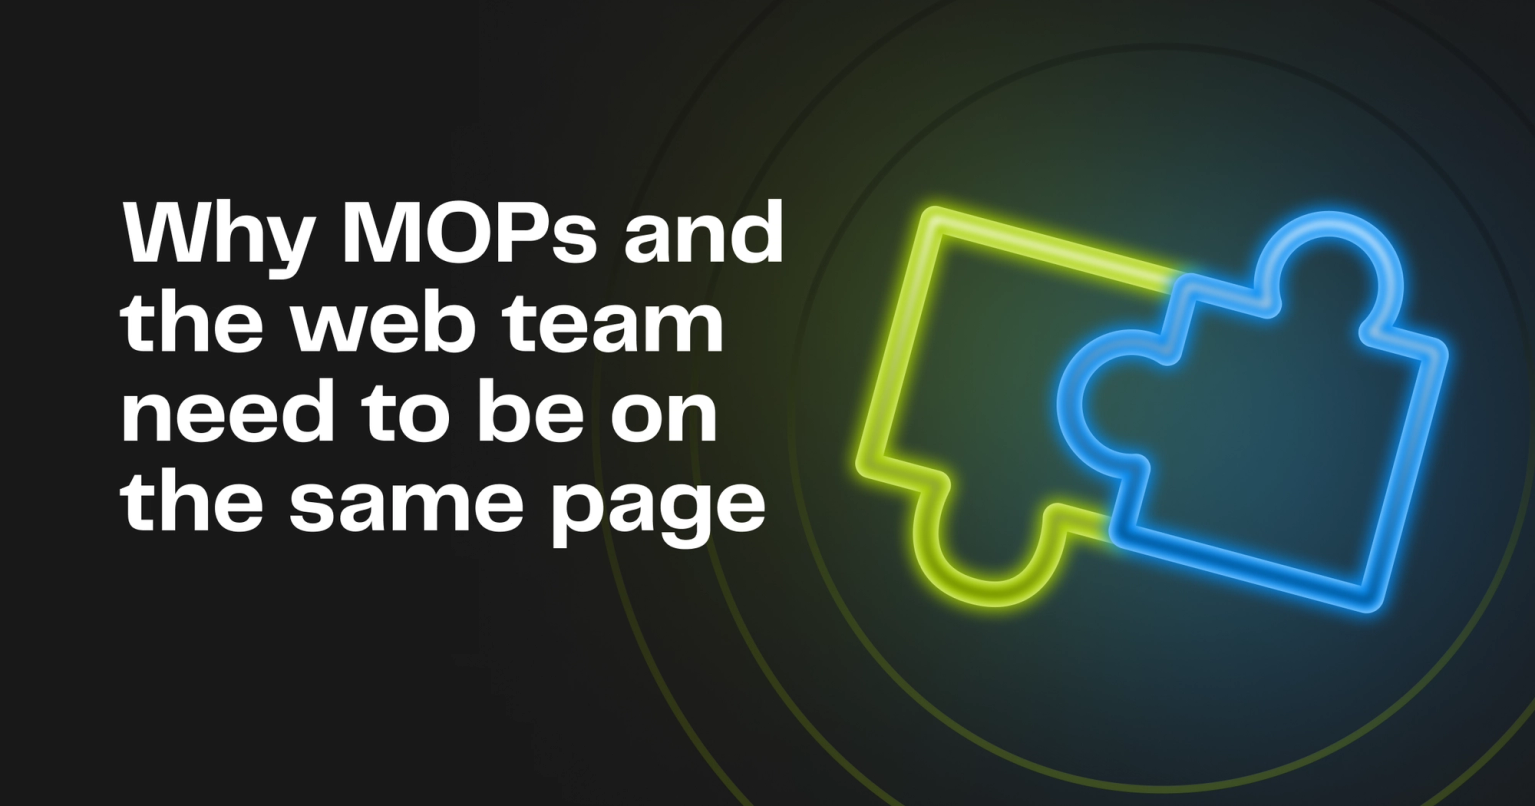 Why MOPs and the web team need to be on the same page